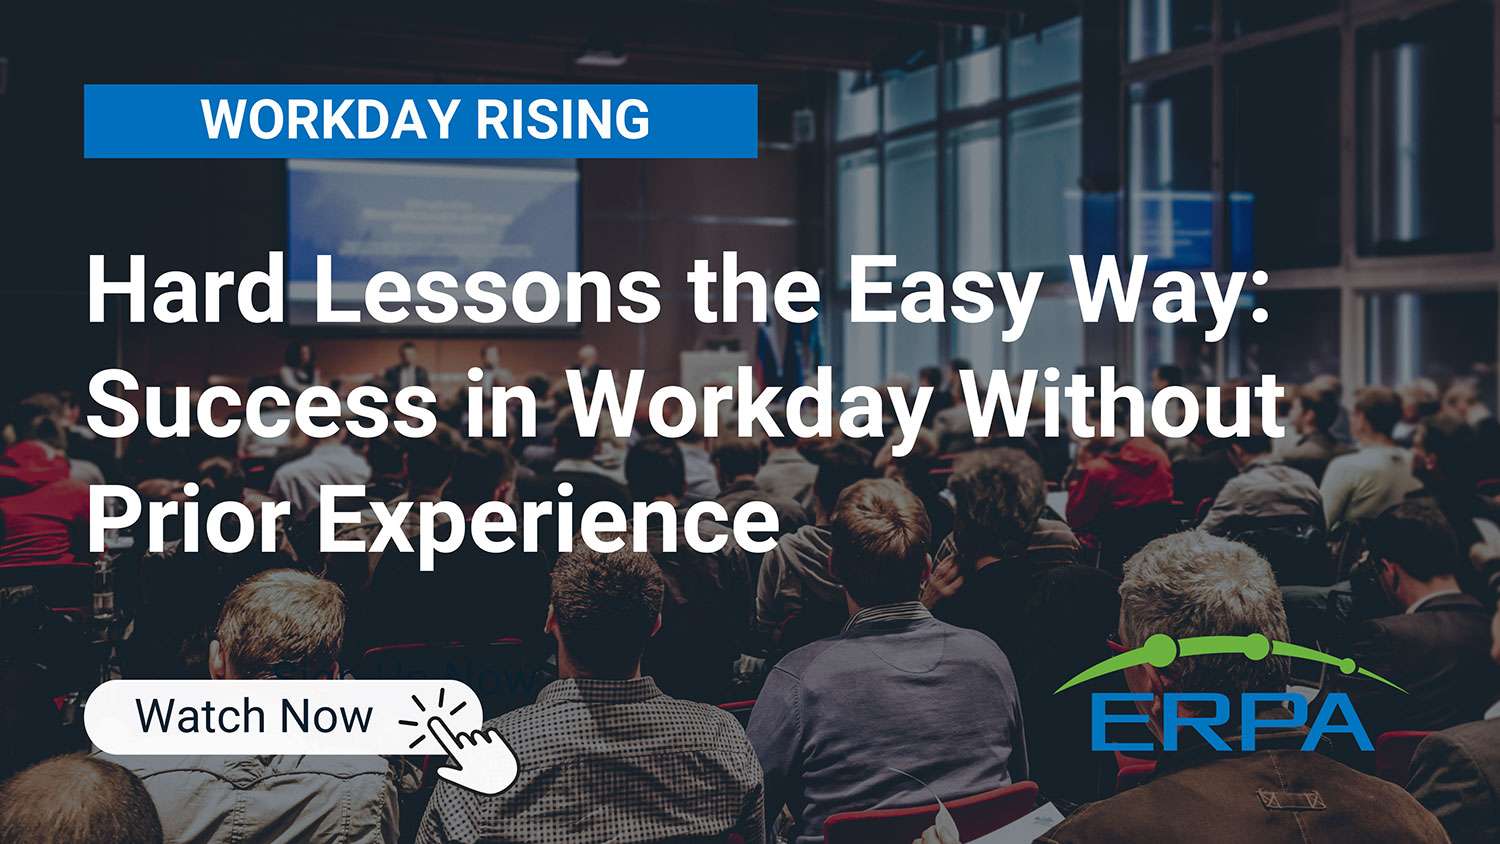 ERPA Workday Rising 2023 - Hard Lessons the Easy Way: Success in Workday Without Prior Experience